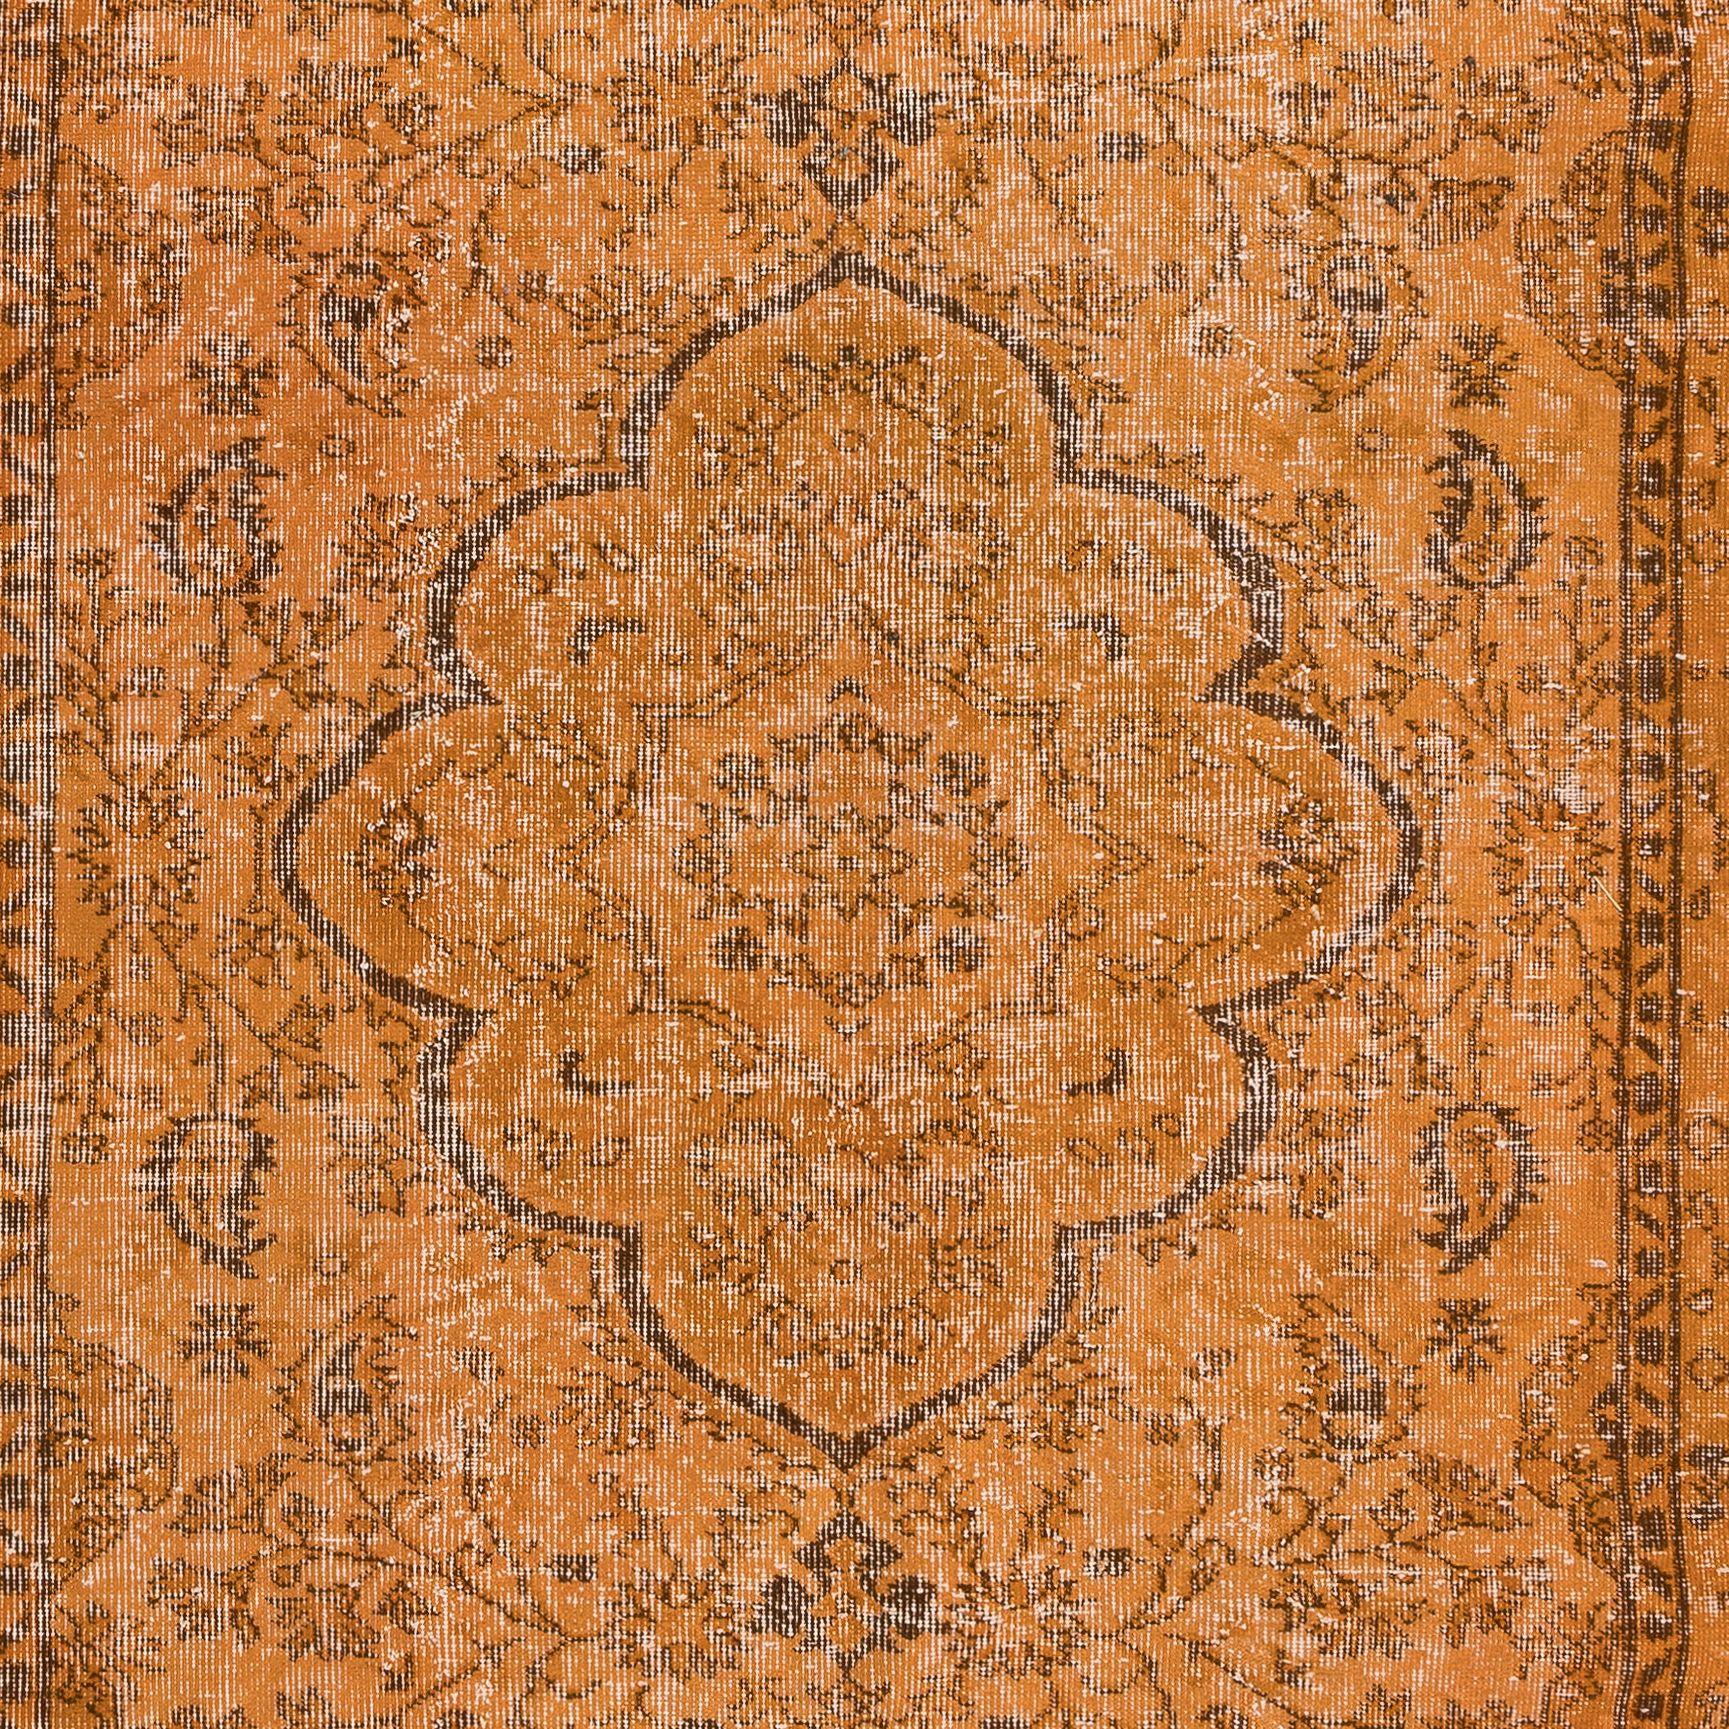 Modern 5.2x8.8 Ft Vintage Orange Area Rug, Handwoven and Handknotted in Turkey For Sale